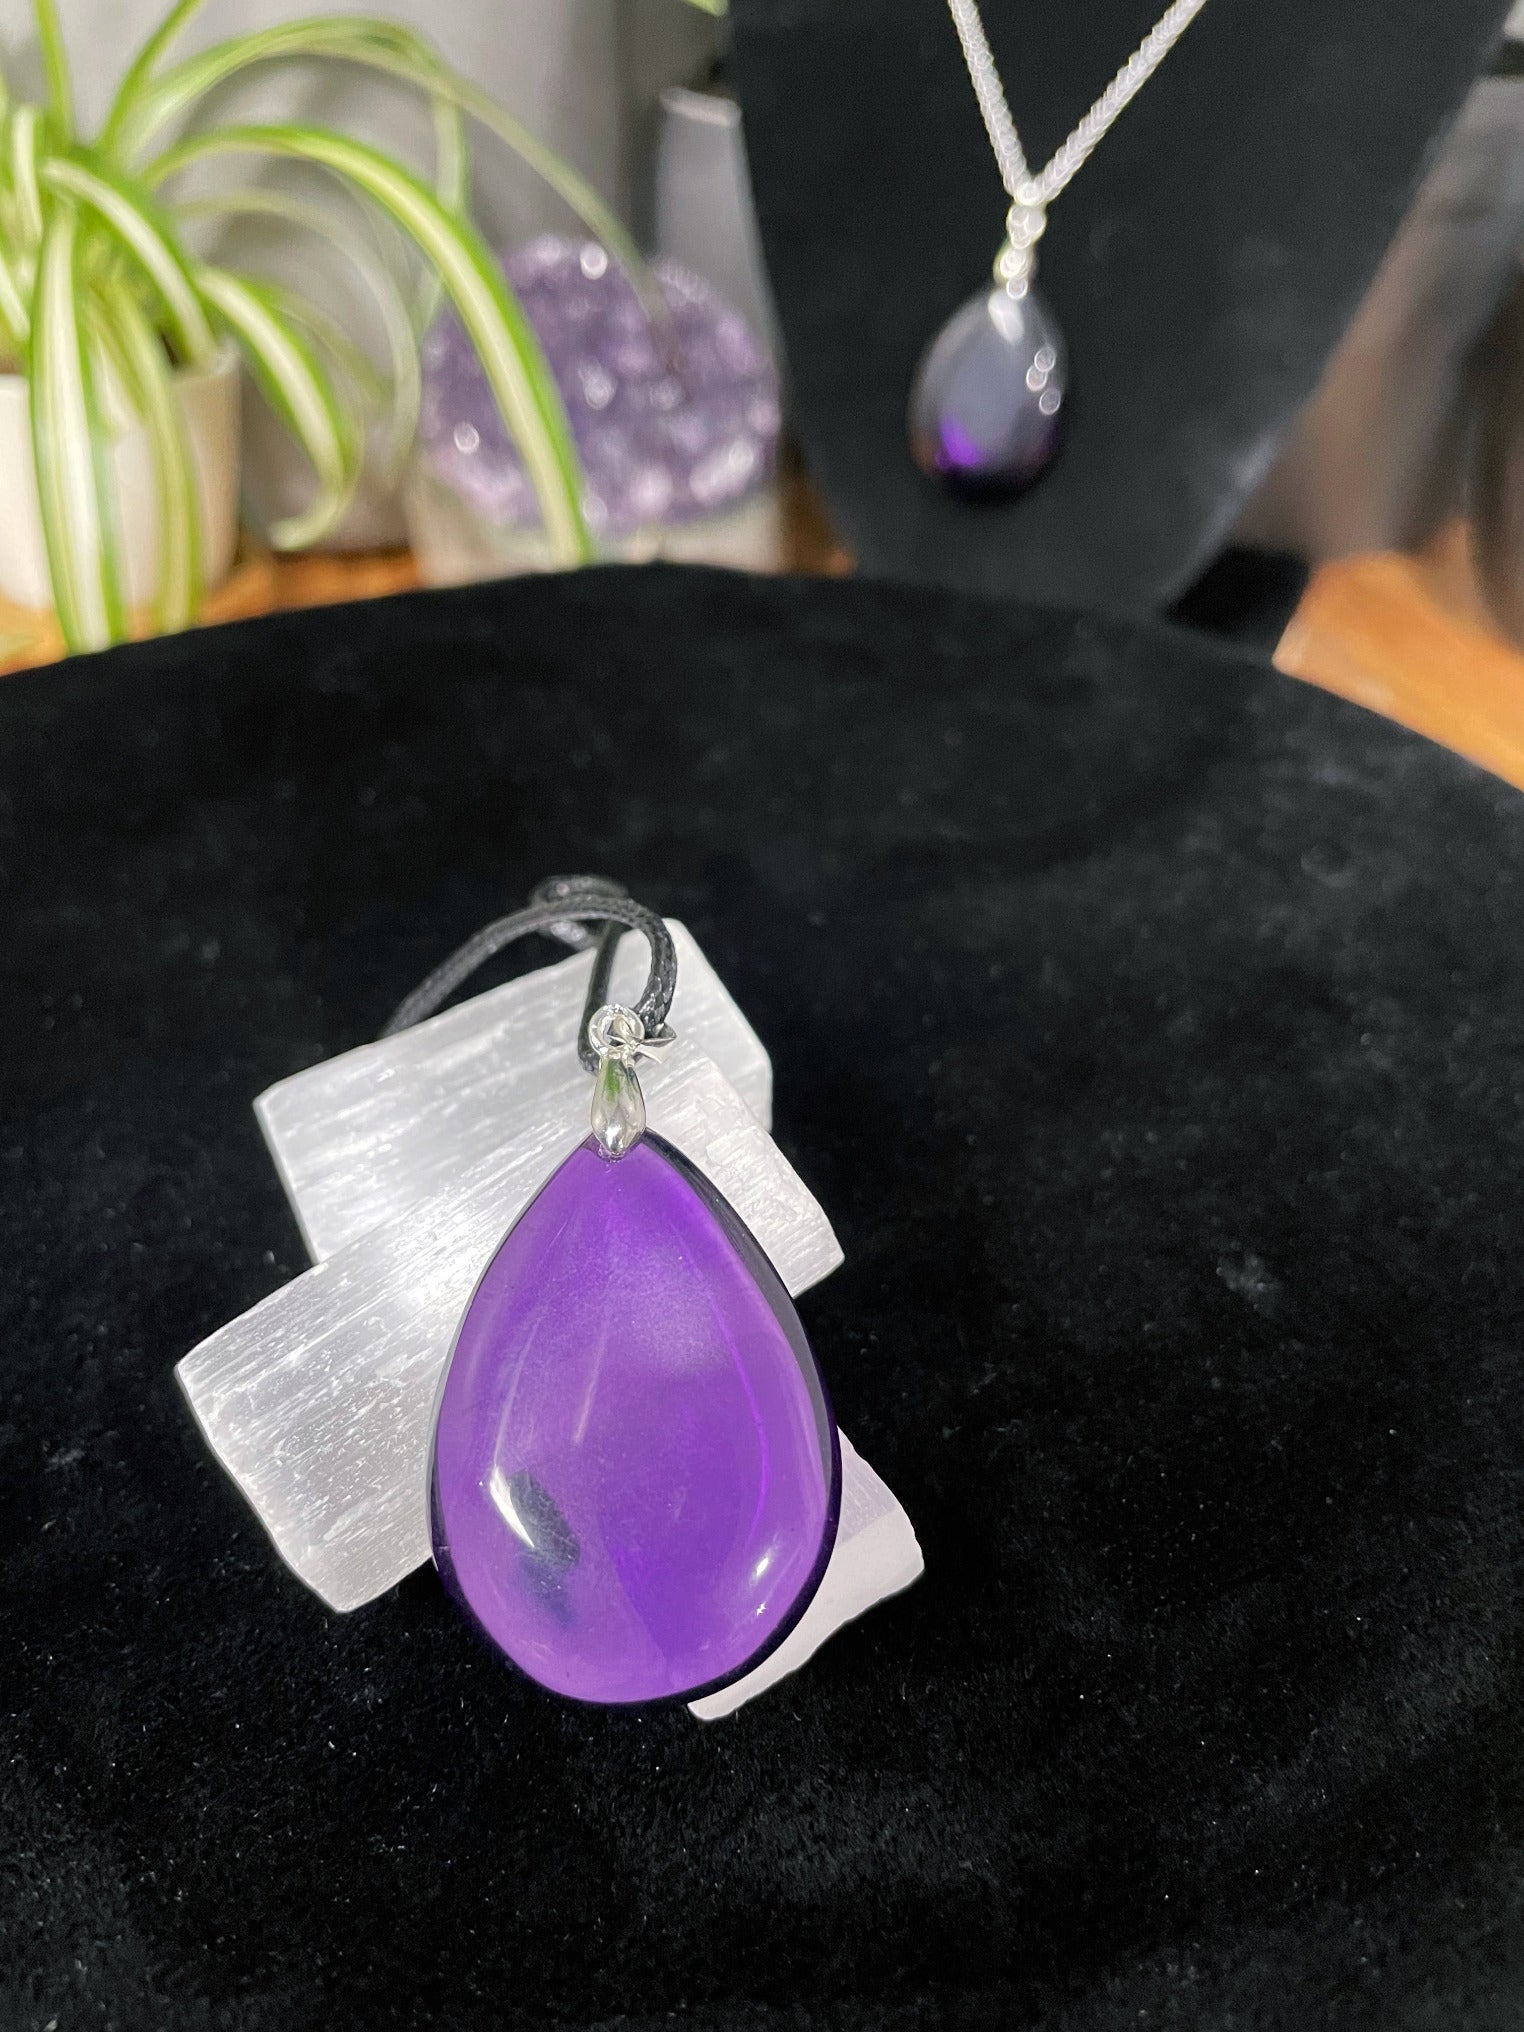 An image of a high-quality purple amethyst teardrop shaped pendant on a necklace. It sits atop some selenite chunks and a black velvet surface.